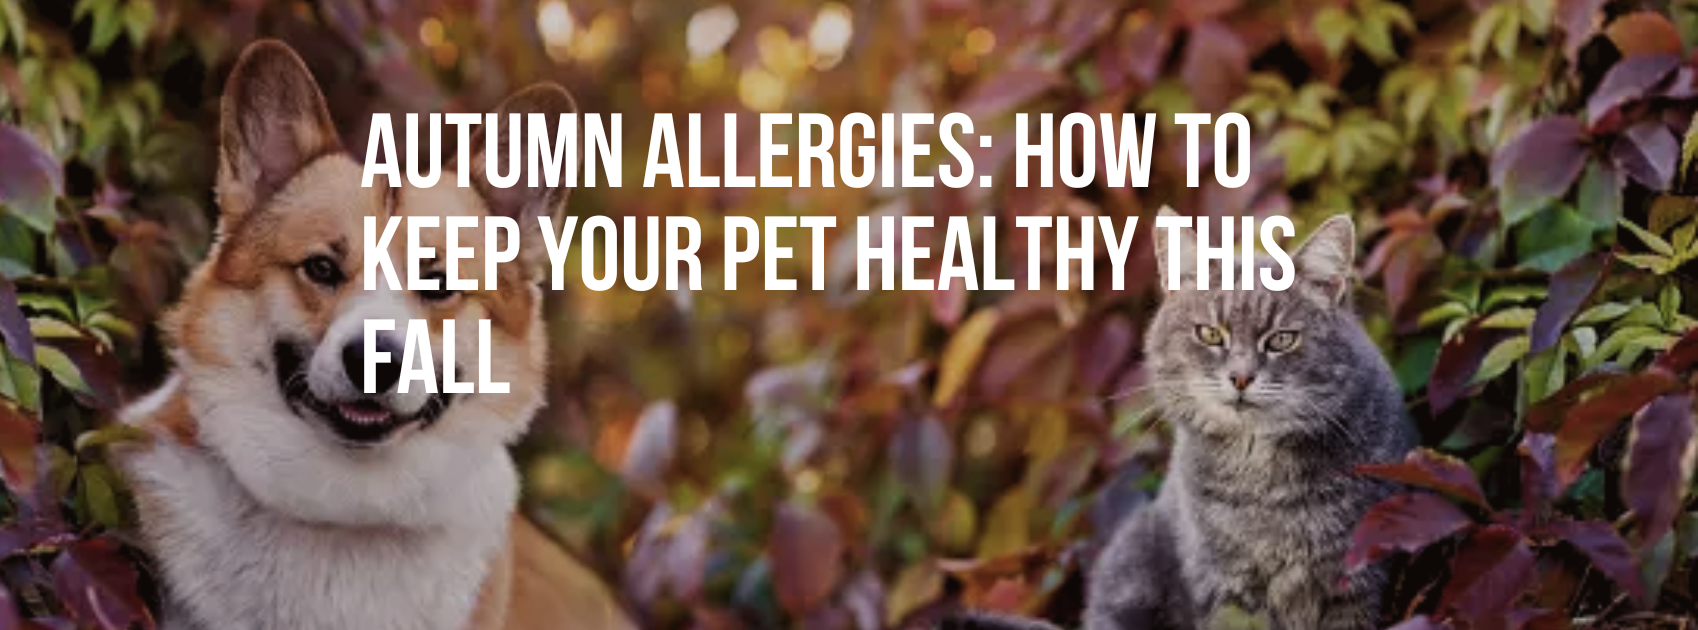 Autumn allergies: How to Keep Your Pet Healthy This Fall